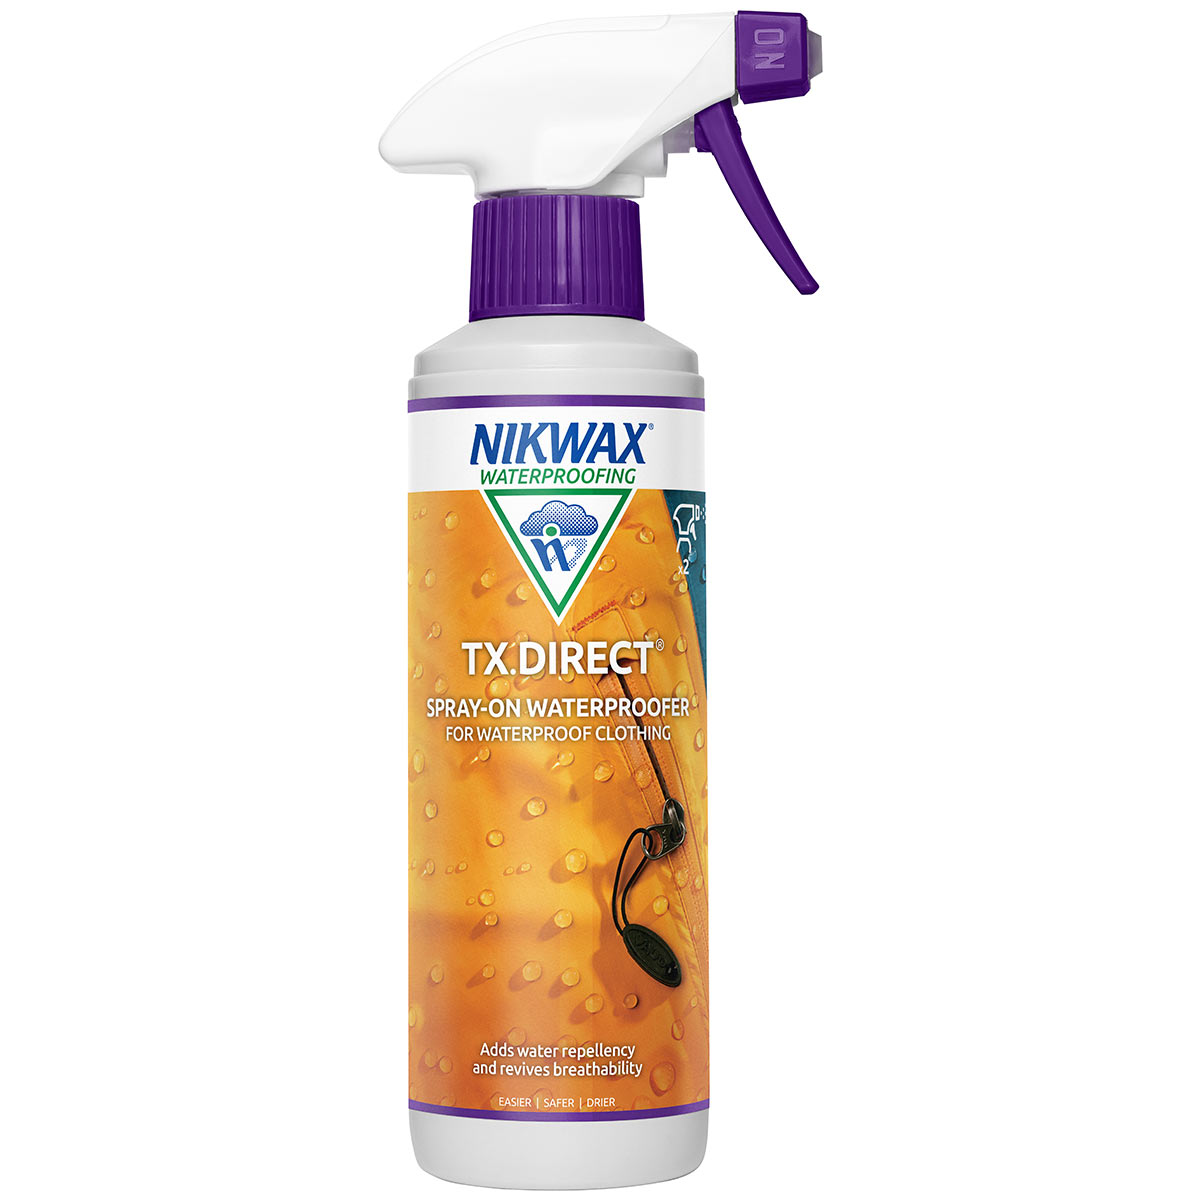 Nikwax TX Direct Spray On Waterproofing for Wet Weather Outdoor Clothing 300ml - Foto 1 di 1